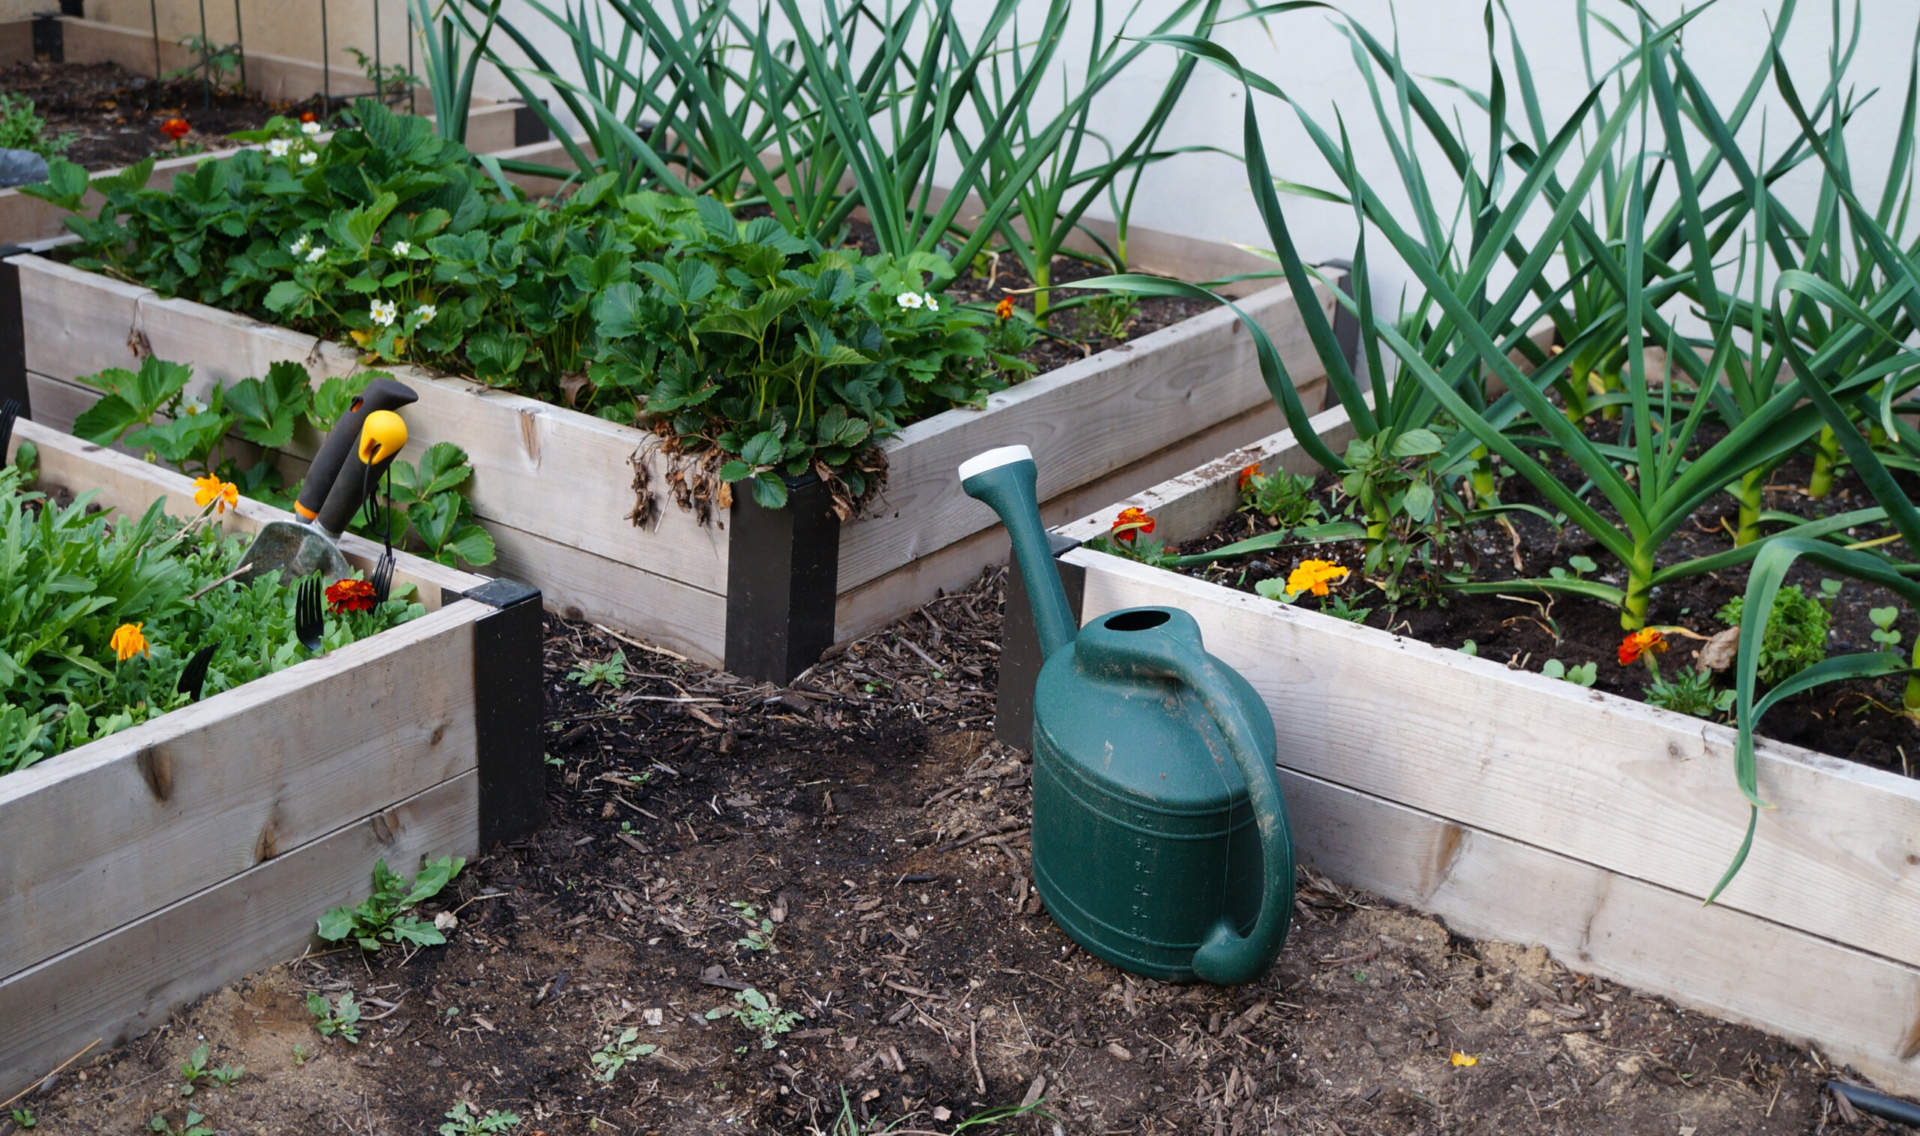 Three raised garden beds with a variety of plants growing in them.